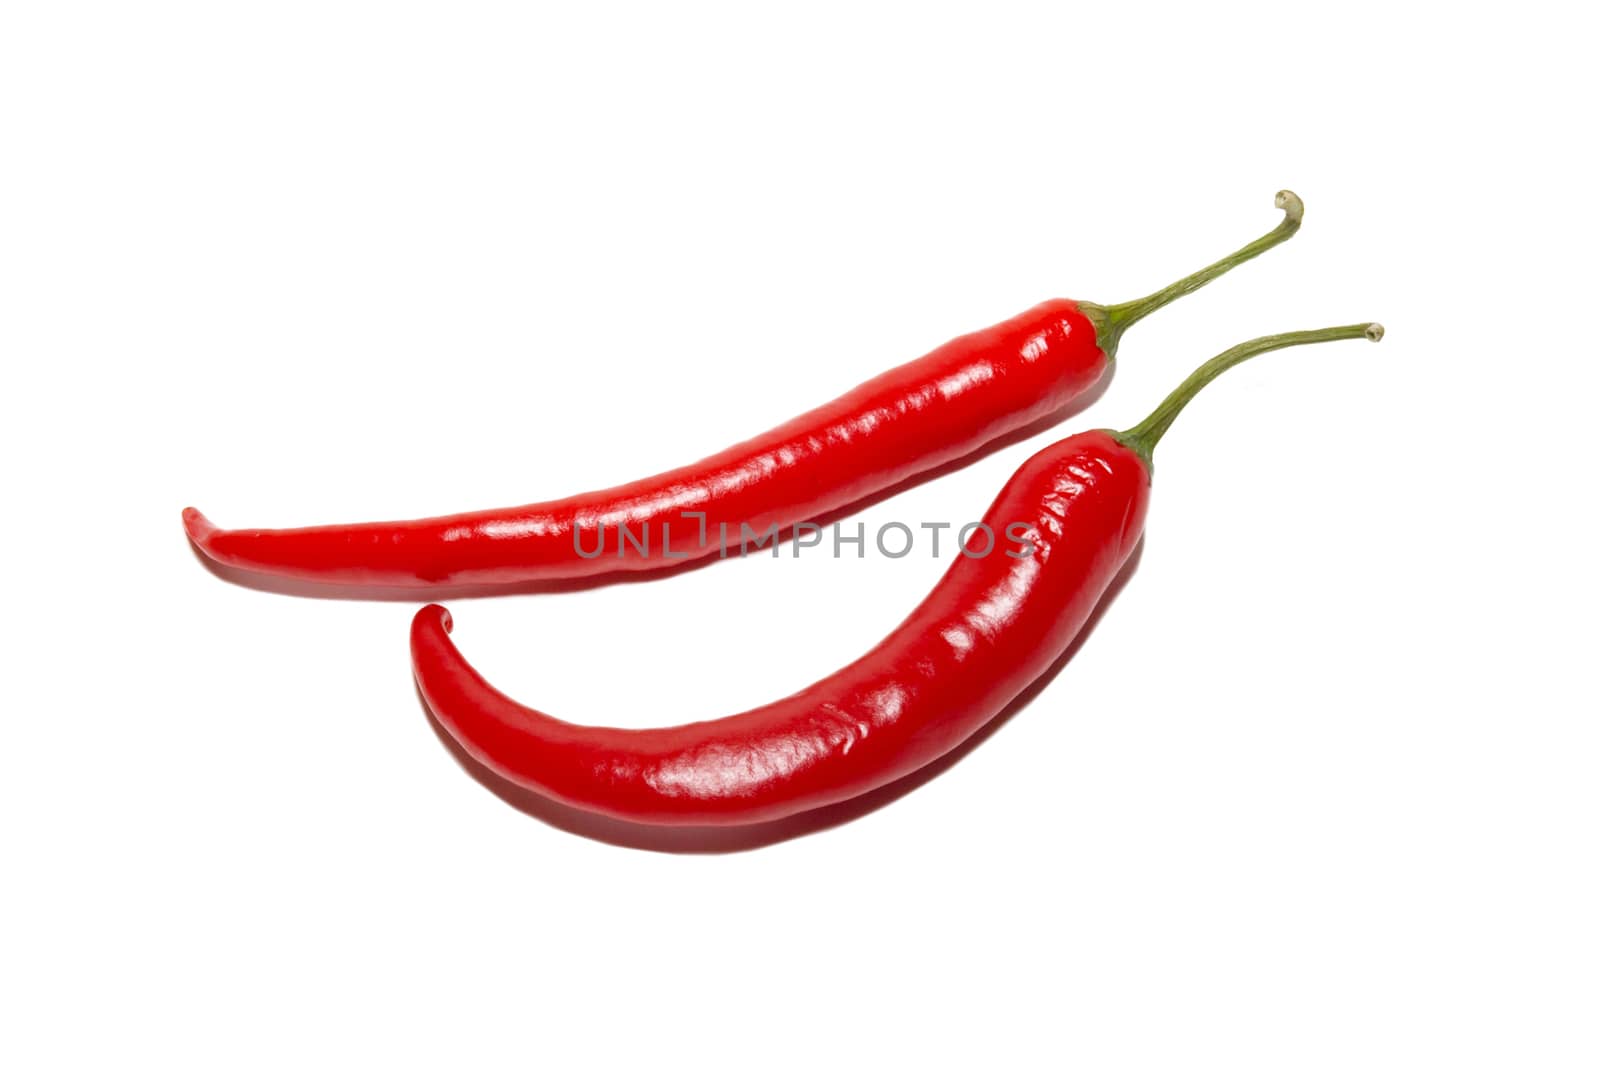 Two red hot chili peppers isolated on white.